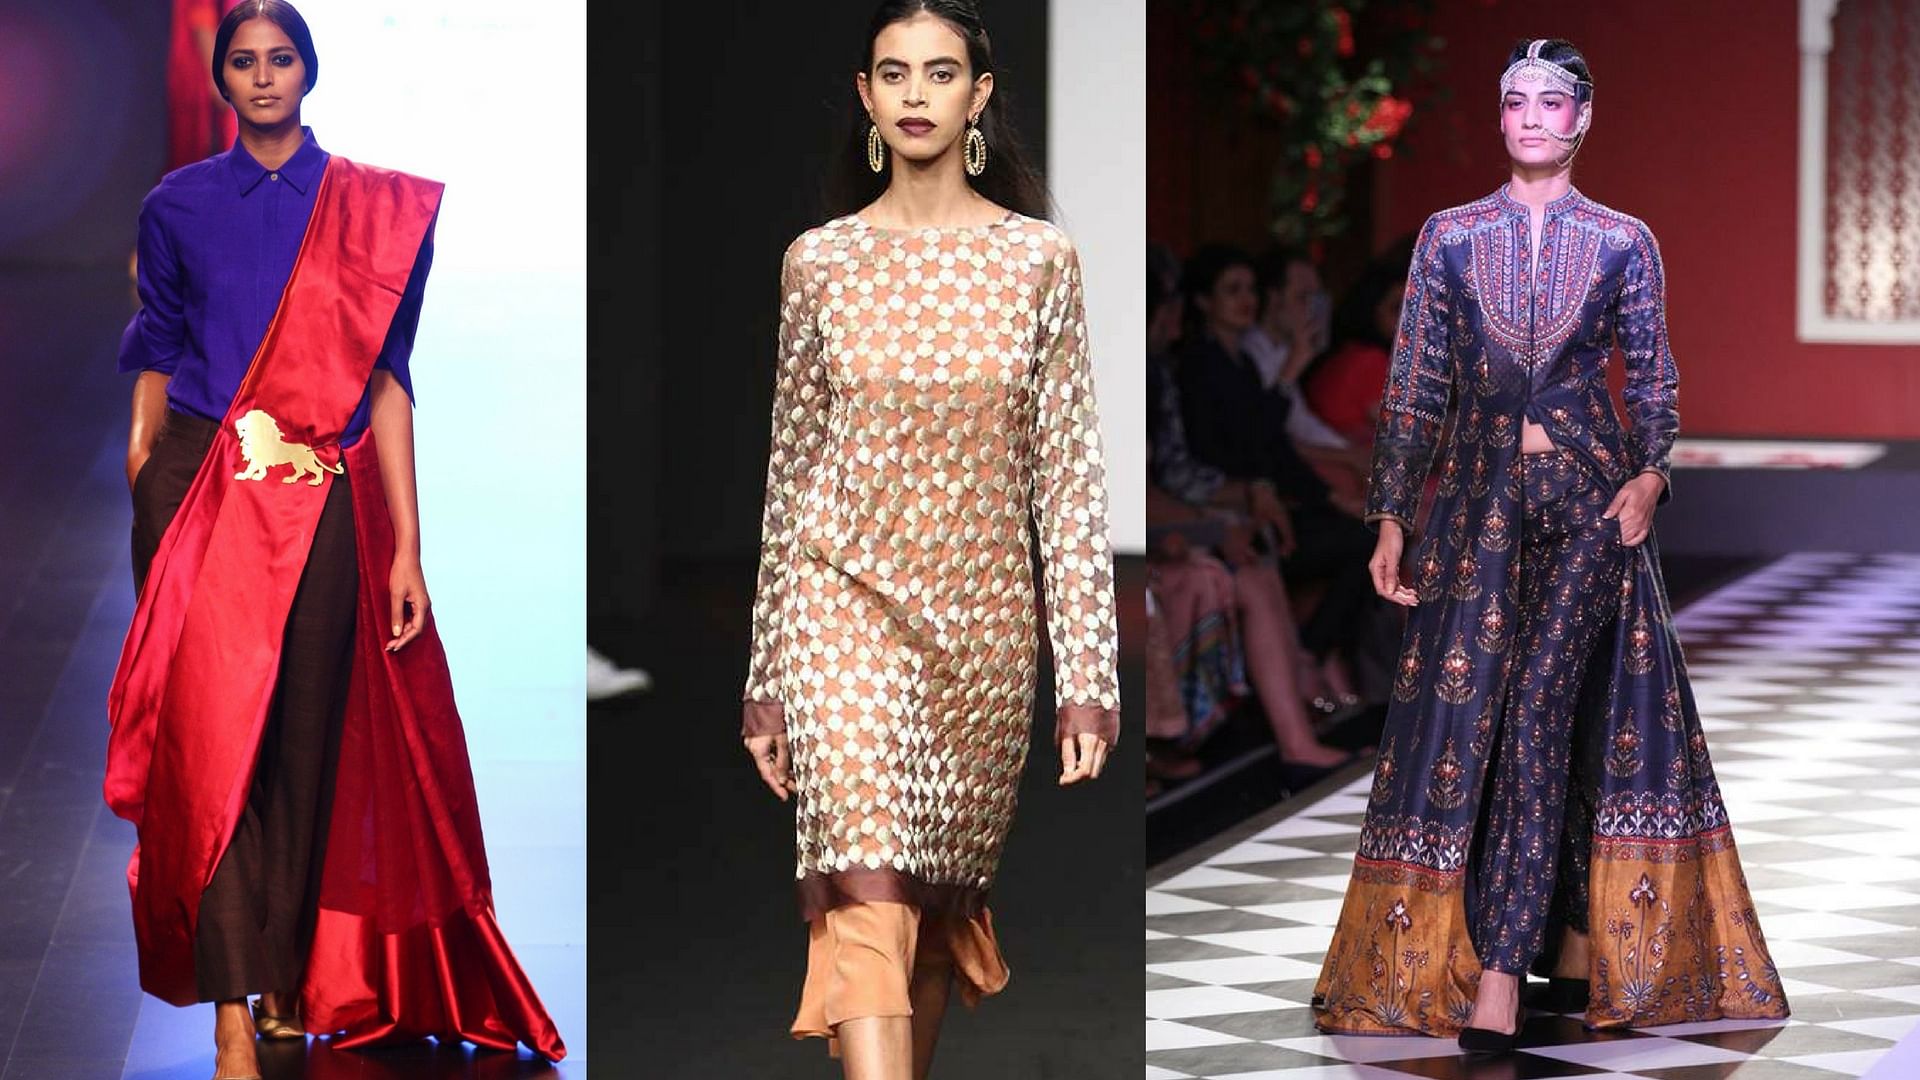 Designs by (from left) Payal Khandwala, Zoraya and Anita Dongre are adding an edge to traditional fashion this Diwali. (Photo courtesy: Elevate Promotions, Zoraya, <a href="https://www.facebook.com/anitadongre/photos/a.10157402113230413.1073741923.80633620412/10157402114070413/?type=3&amp;theater">Facebook/ AnitaDongre</a>)